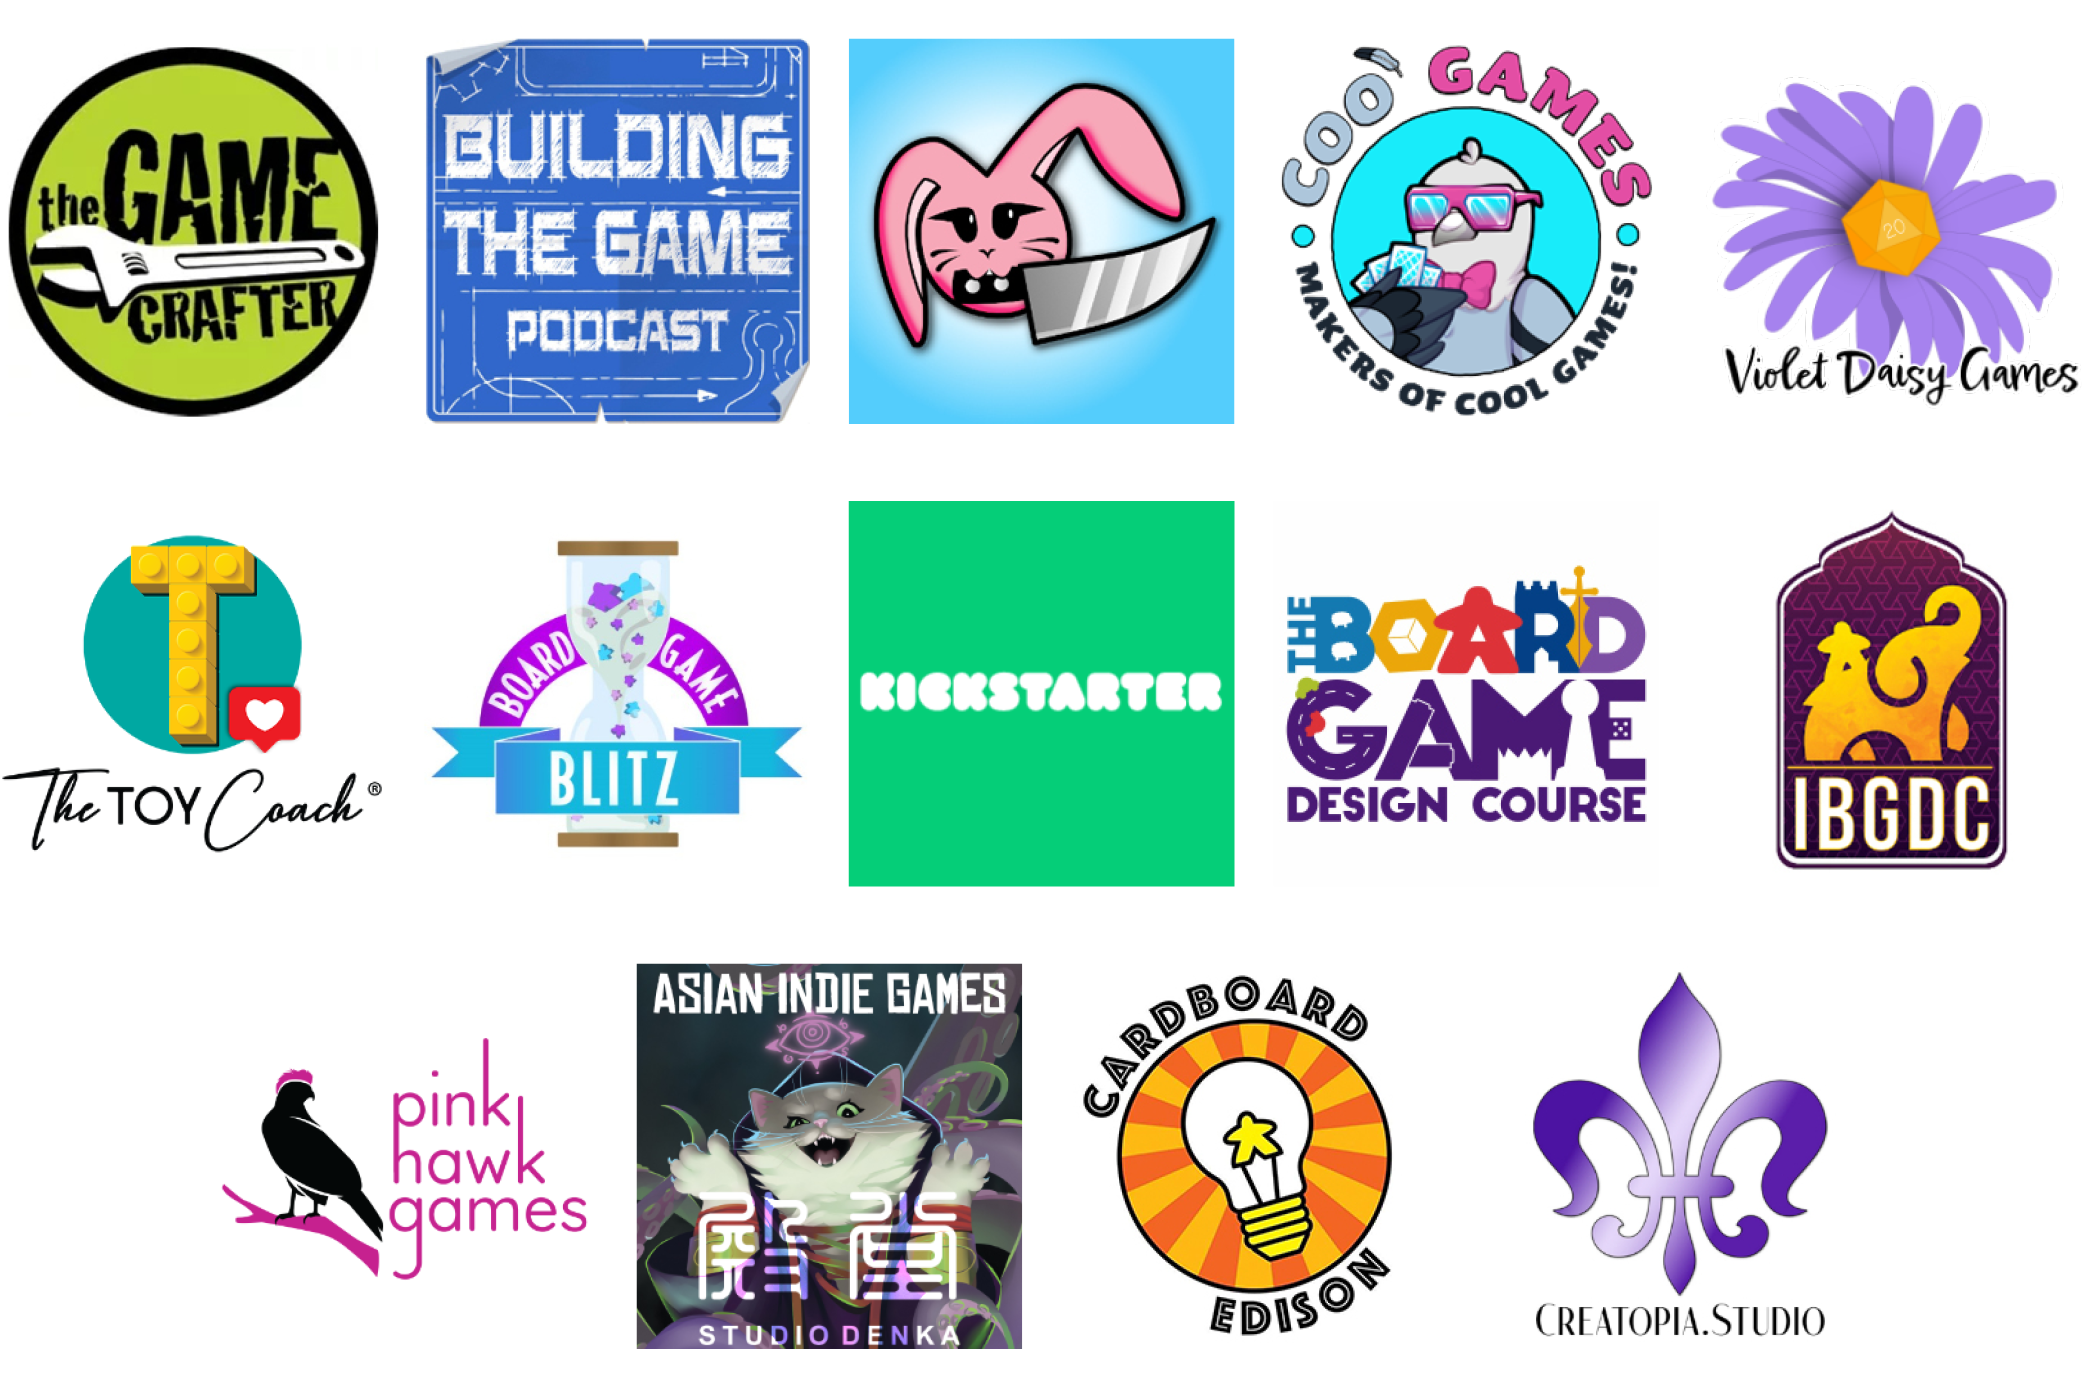 Sponsor logos for Jan 2024: The Game Crafter, Building the Game Podcast, Knife Bunny, Coo Games, Violet Daisy Games, The Toy Coach, Board Game Blitz, Kickstarter, The Board Game Design Course, IBGDC, Pink Hawk Games, Studio Denka, Cardboard Edison, Creatopia